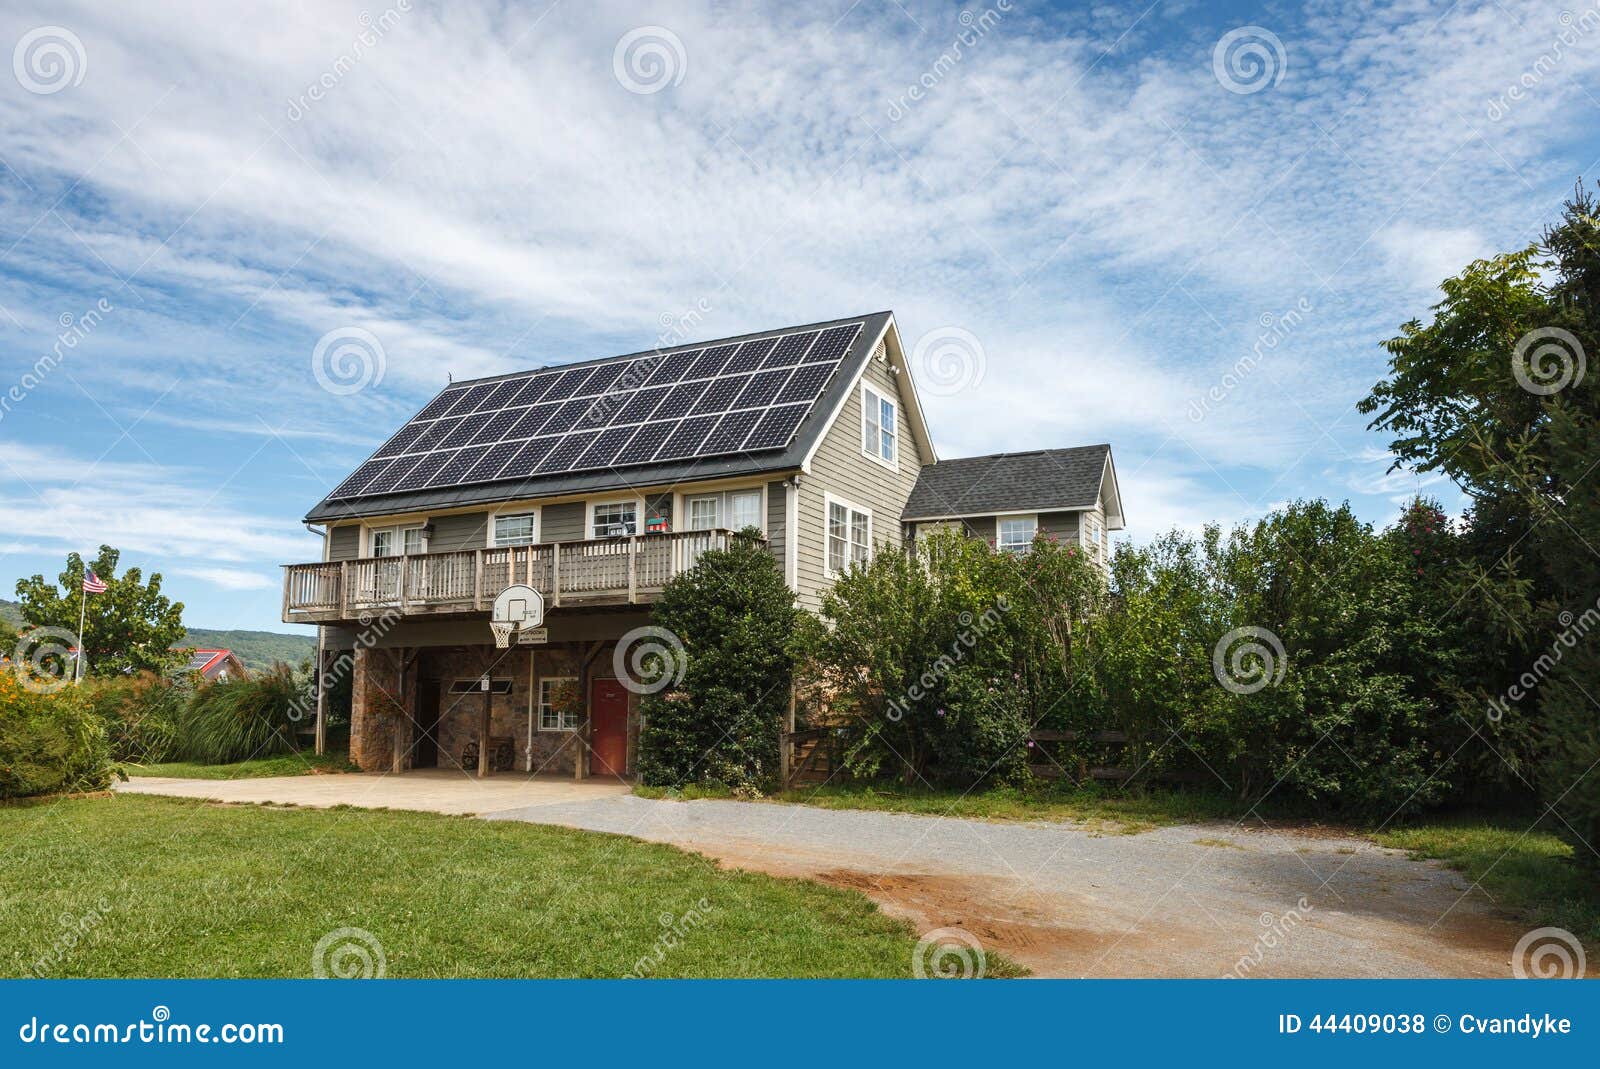 Solar Panels Energy Conservation. The use of solar panels on the roof of this building to generate and support electricity is a prime example of energy conservation.